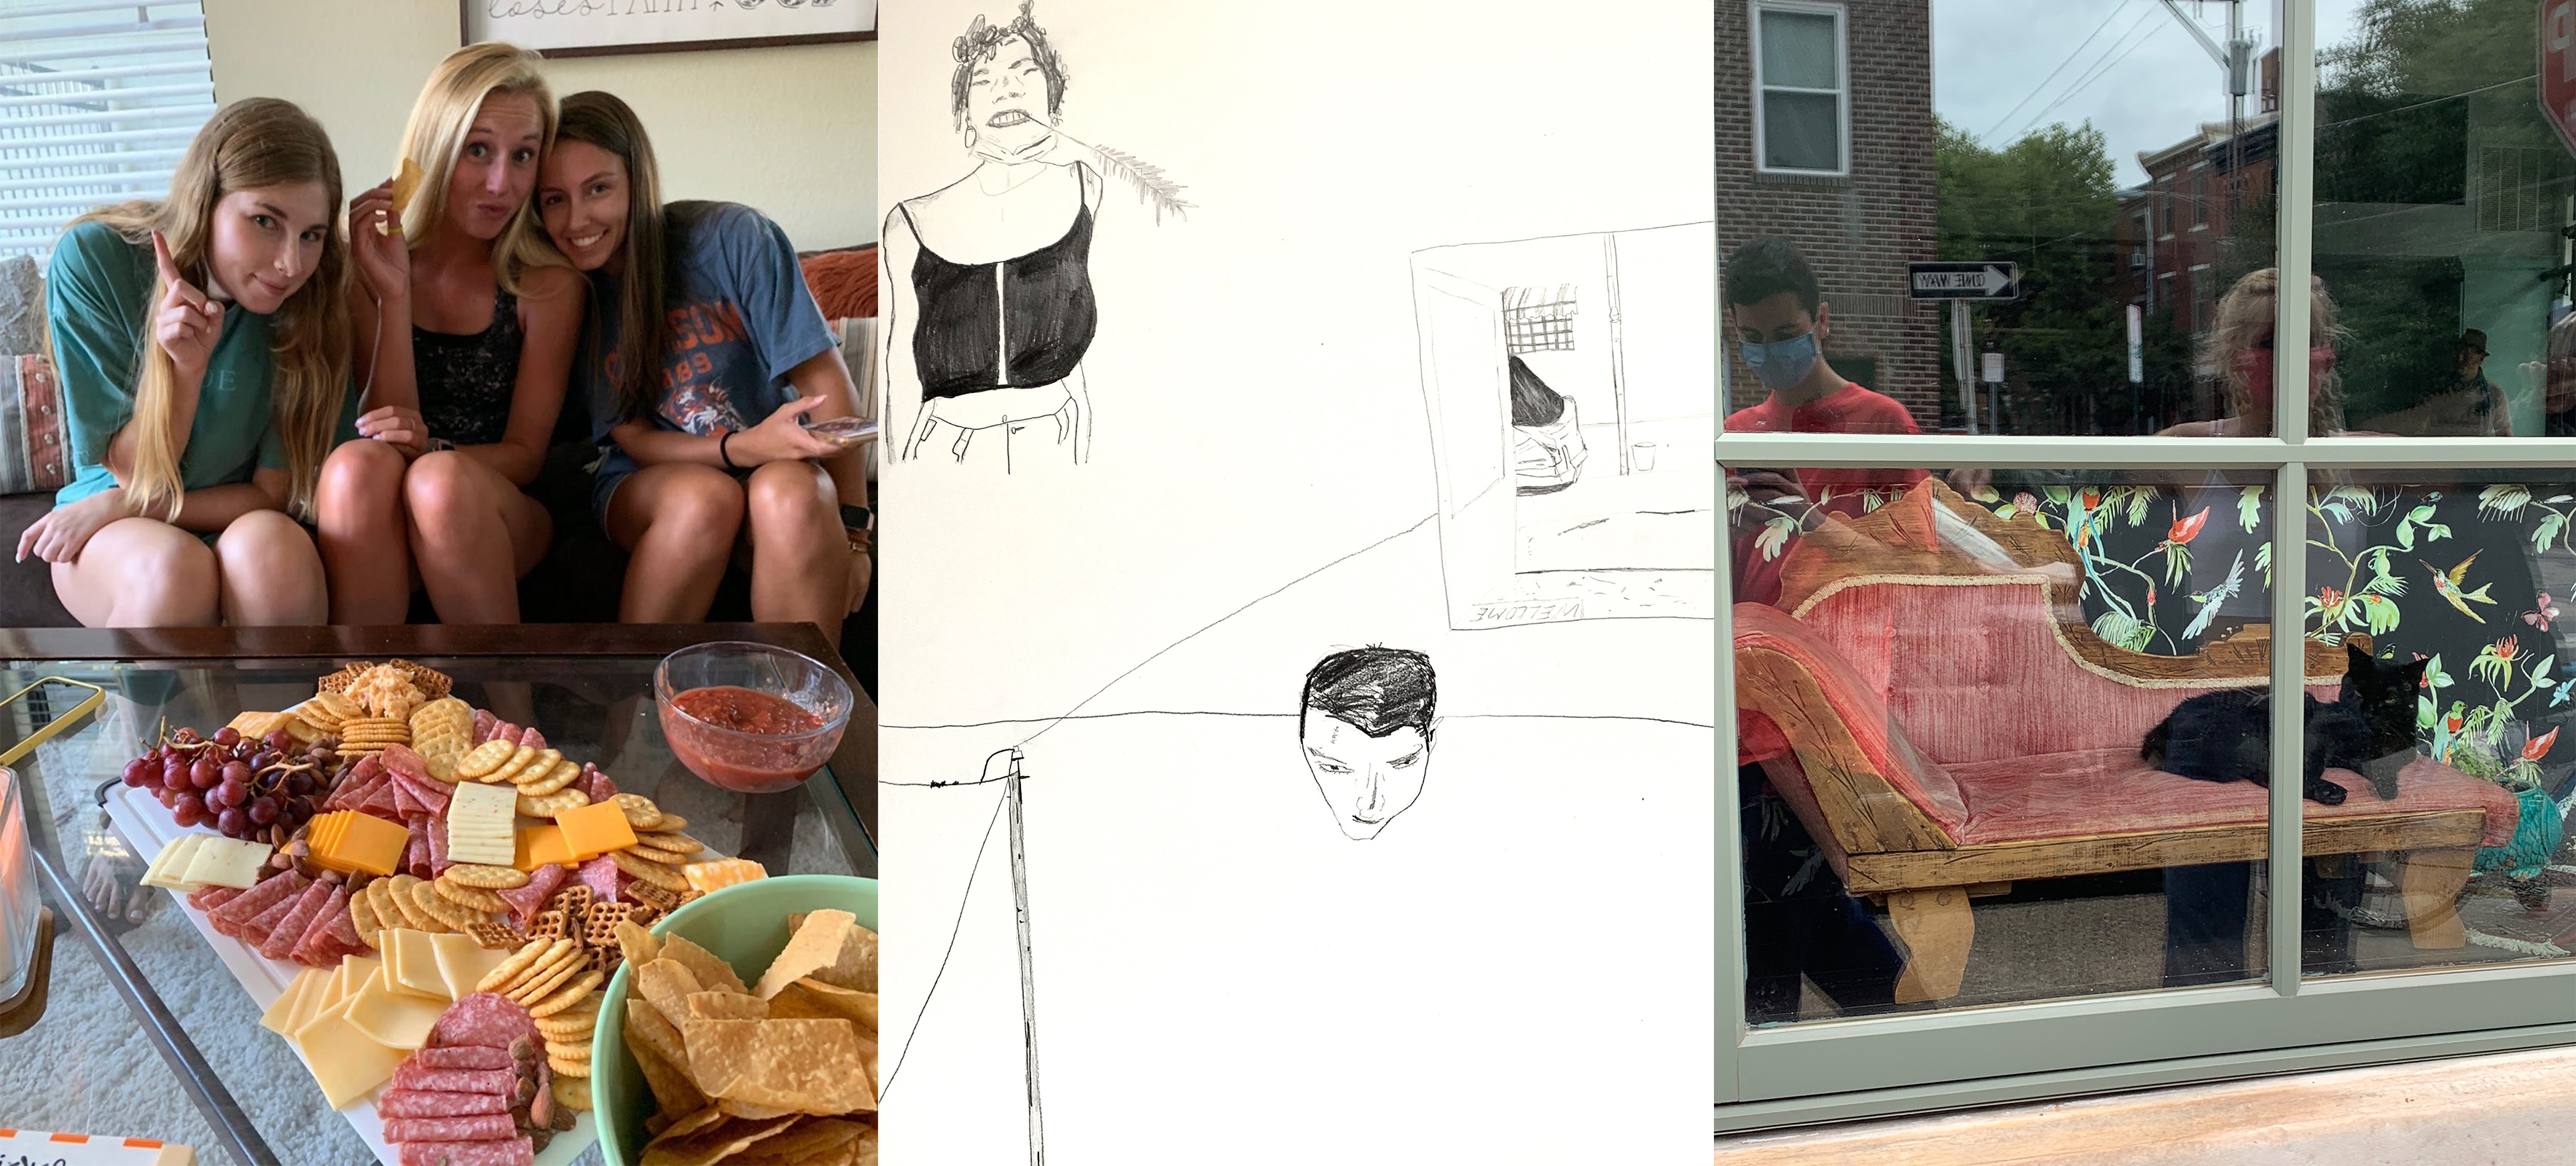 Clemson University sophomore Elizabeth Rew's roommates pose alongside a charcuterie board they made together; A drawing by Temple university student Kyle Caruthers of his living space, including his roommate, a self portrait, and the street he lives on; Caruthers and a friend, wearing masks, document a lounging cat (Courtesy Elizabeth Rew; Courtesy Kyle Caruthers (2))